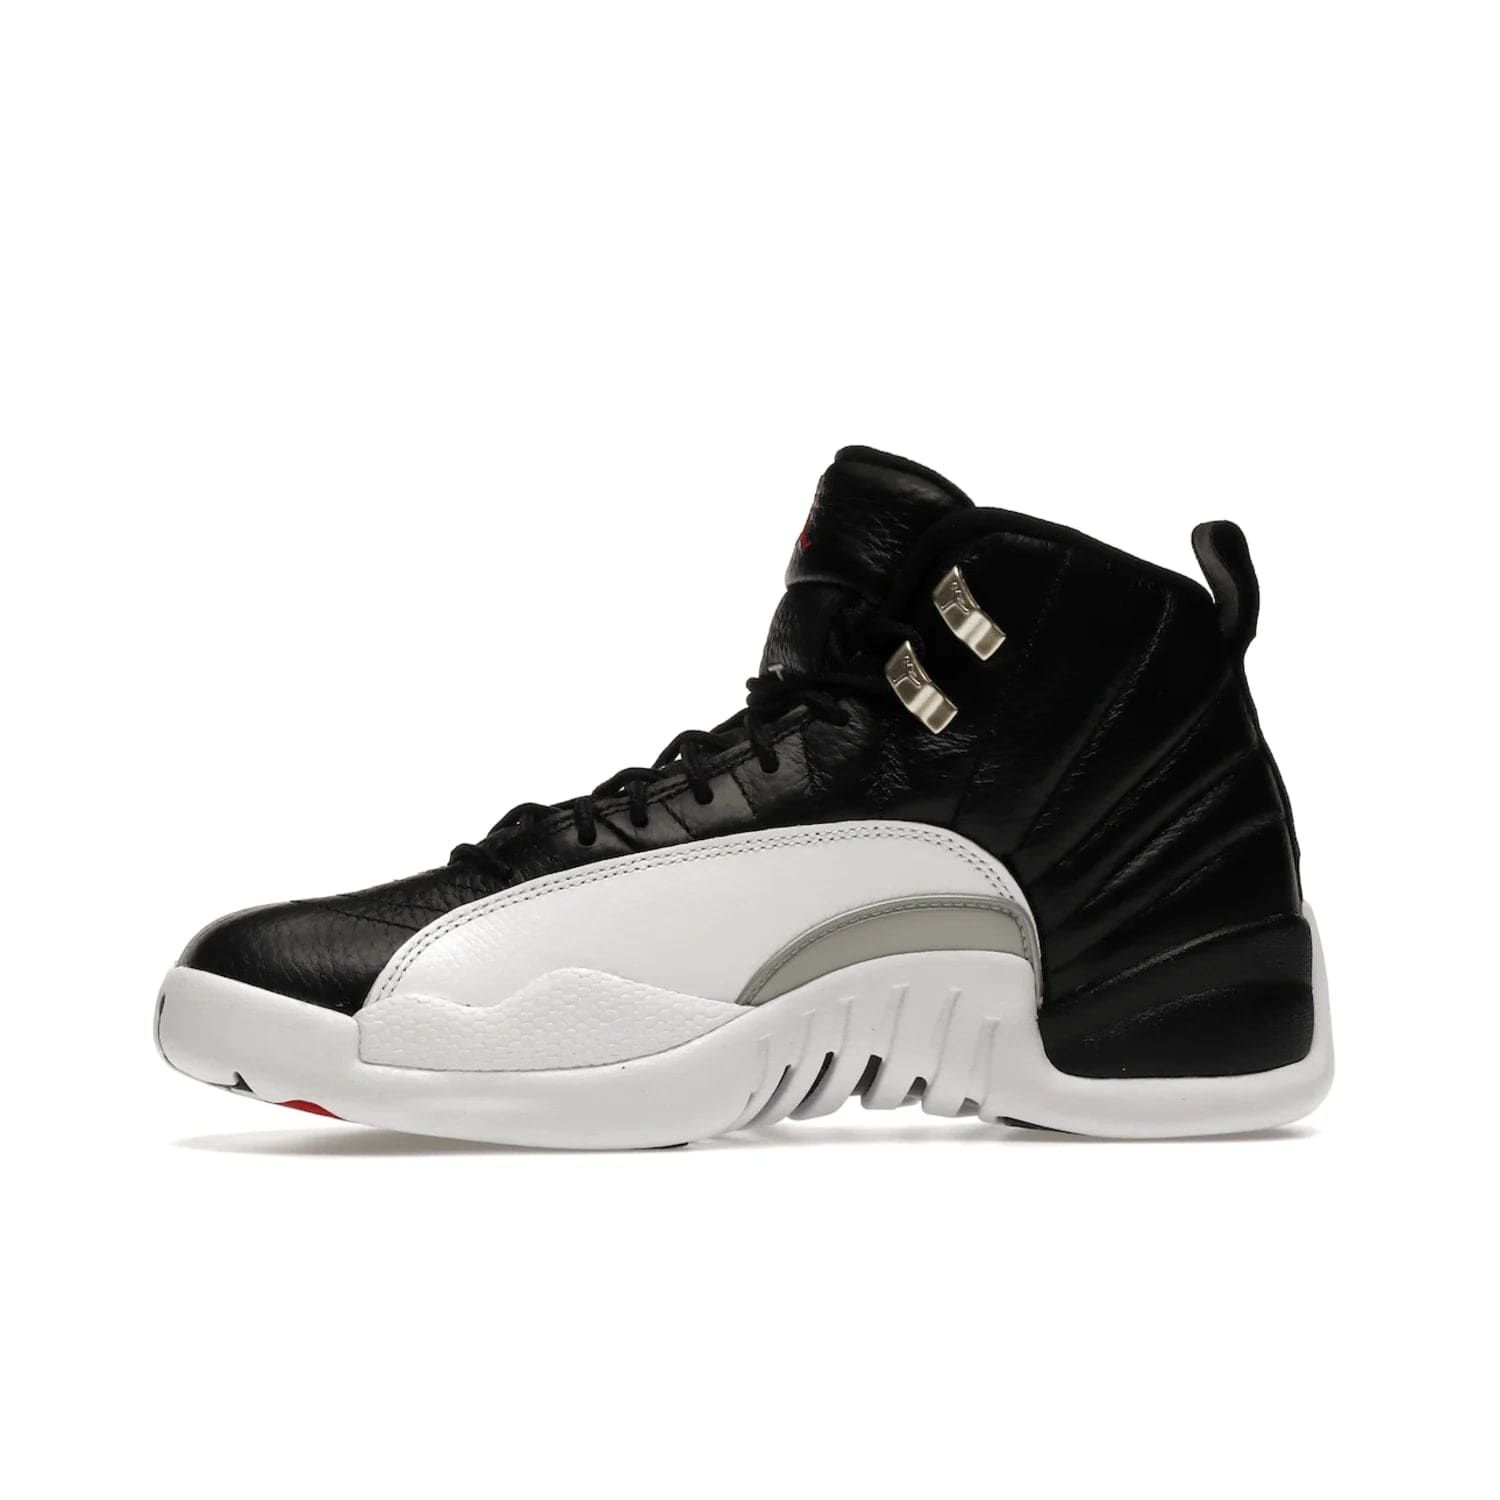 Jordan 12 Retro Playoffs (2022) - Image 18 - Only at www.BallersClubKickz.com - Retro Air Jordan 12 Playoffs. Celebrate 25 years with MJ's iconic shoe. Black tumbled leather upper, white sole with carbon fiber detailing and Jumpman embroidery. Must-have for any Jordan shoe fan. Releases March 2022.